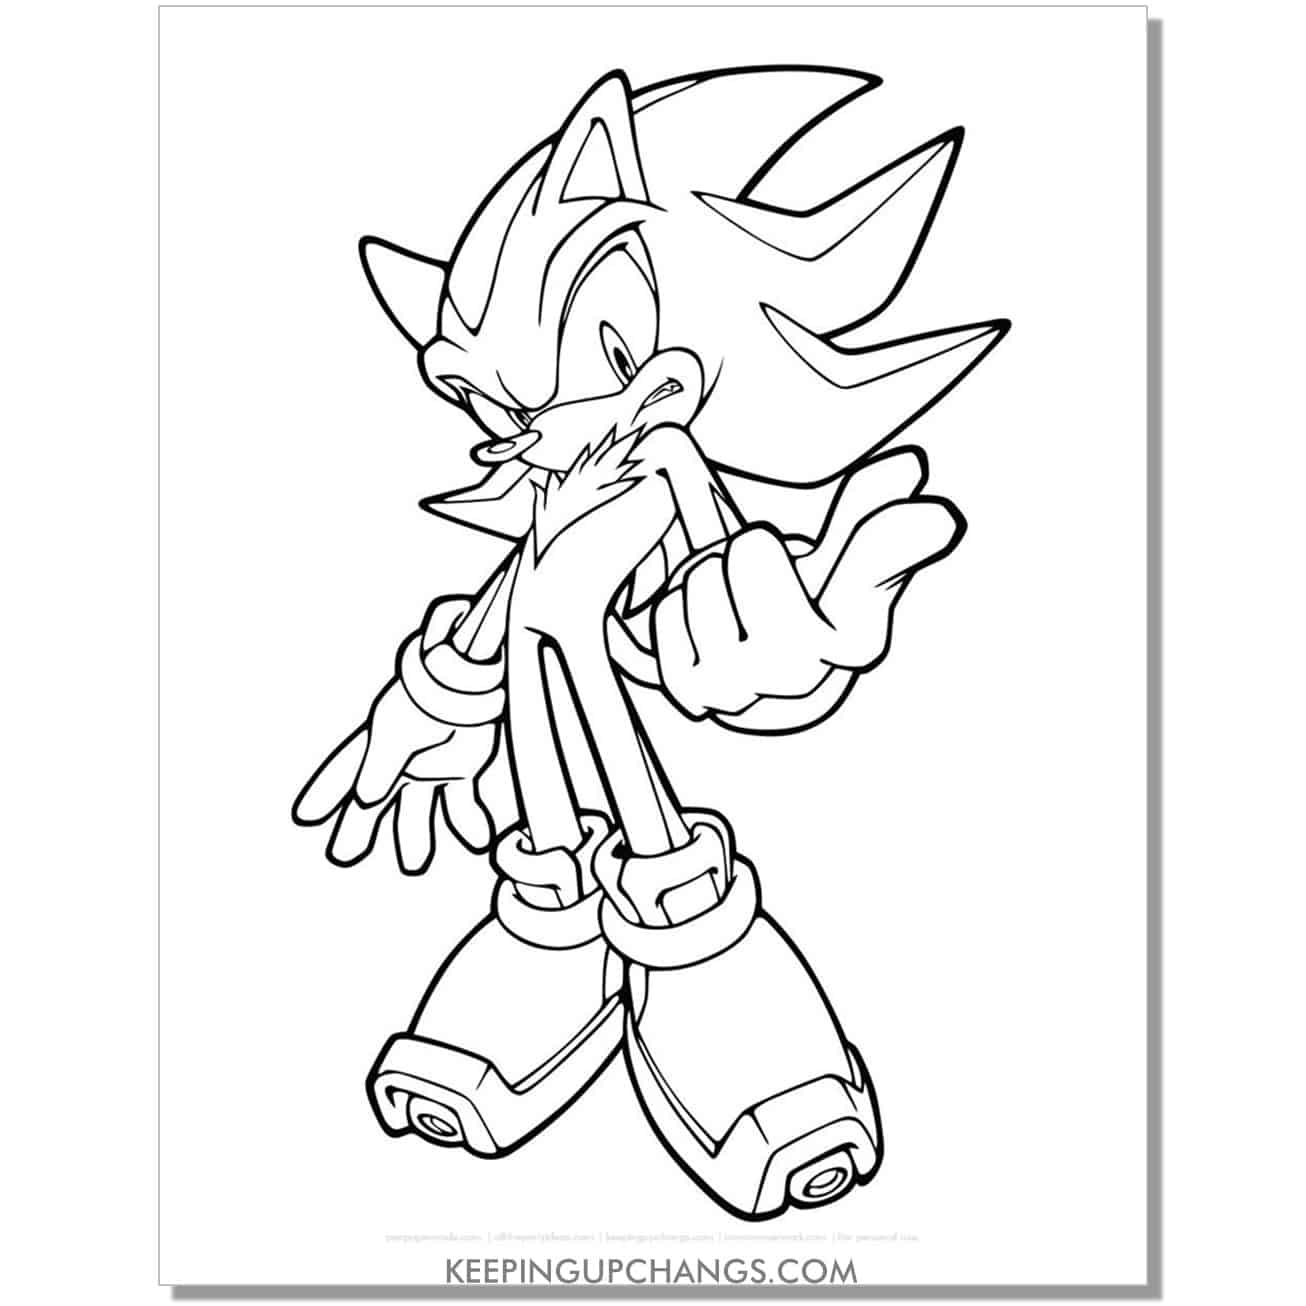 shadow sonic with fist facing upward and index finger pointing coloring page.